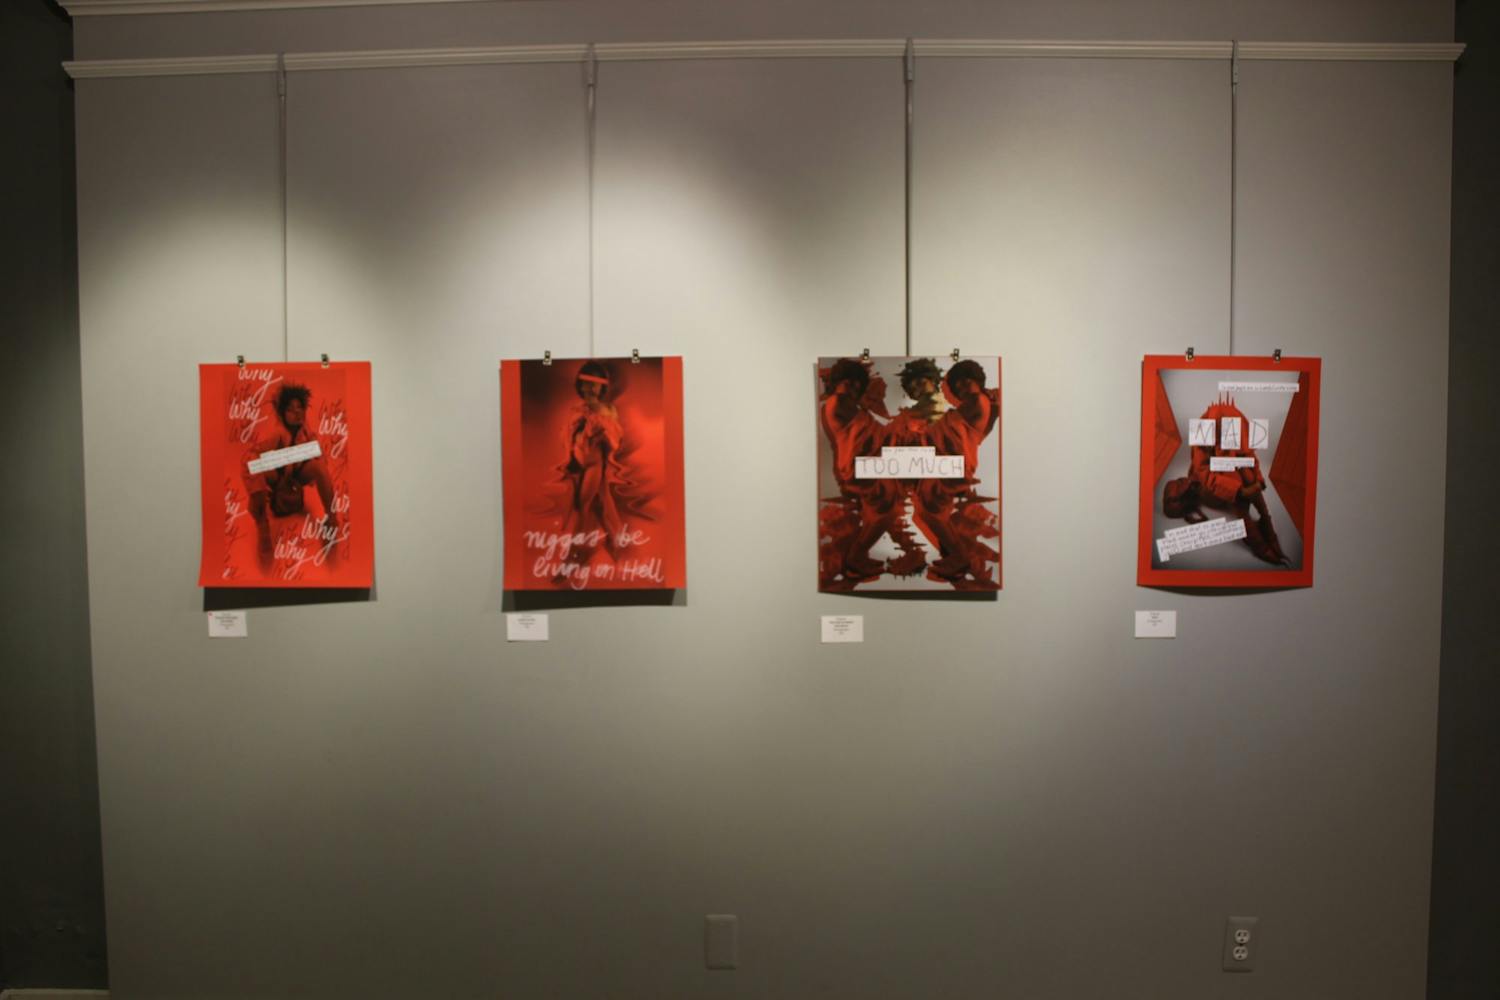 Riverside Arts Center showcases "Insecurity" in its newest gallery